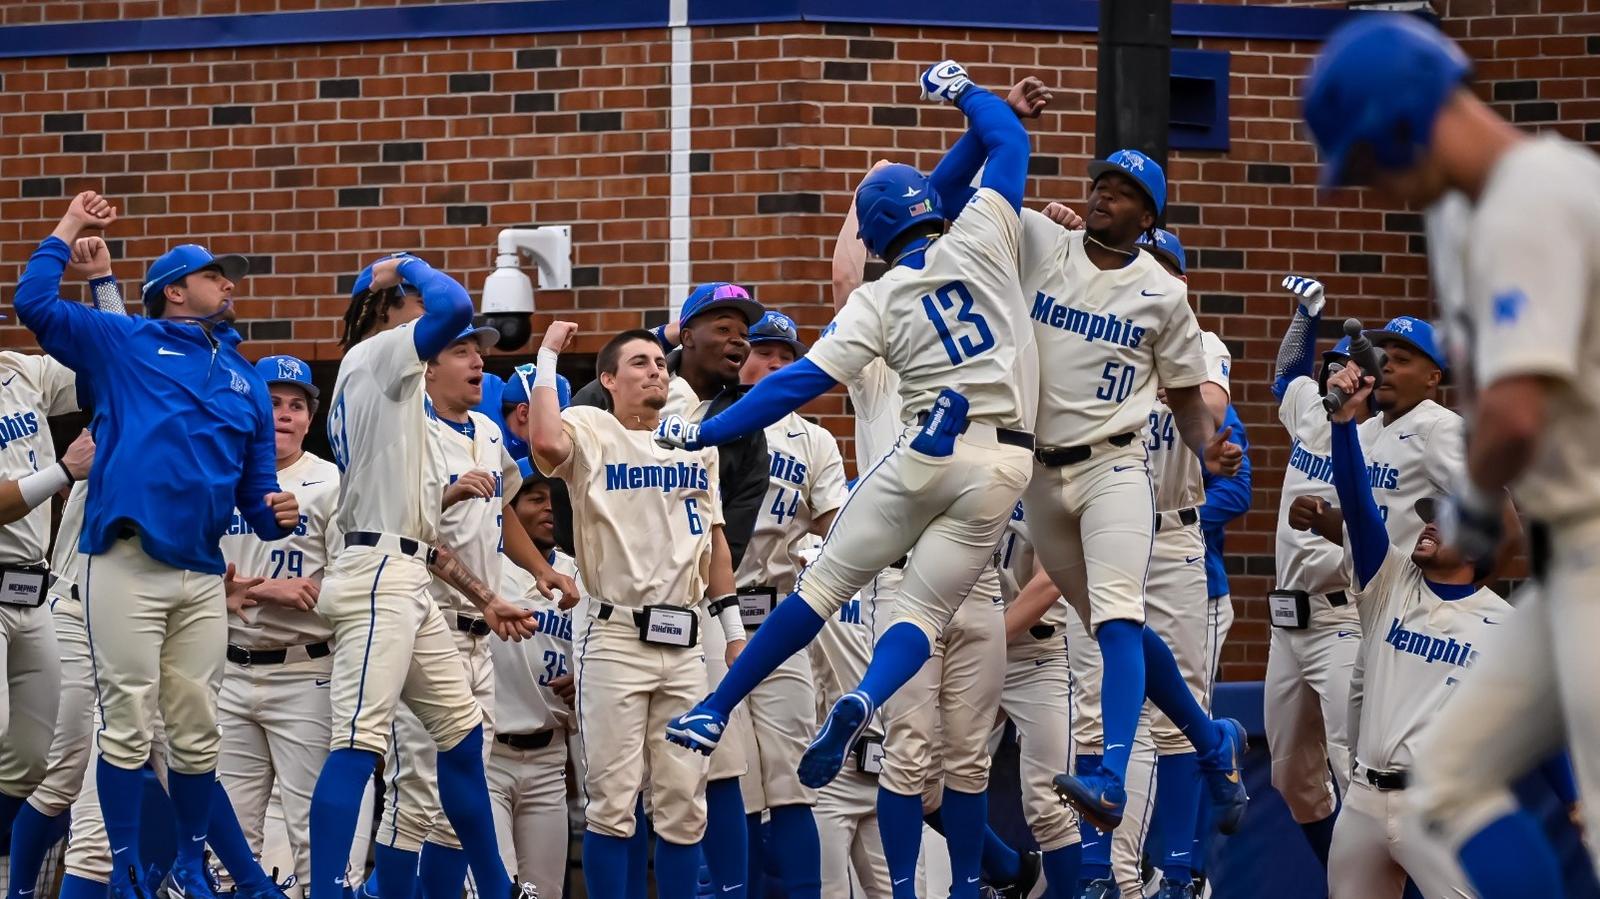 Memphis Tigers Gear Up to Challenge No. 7 Pirates in Three-Game Series